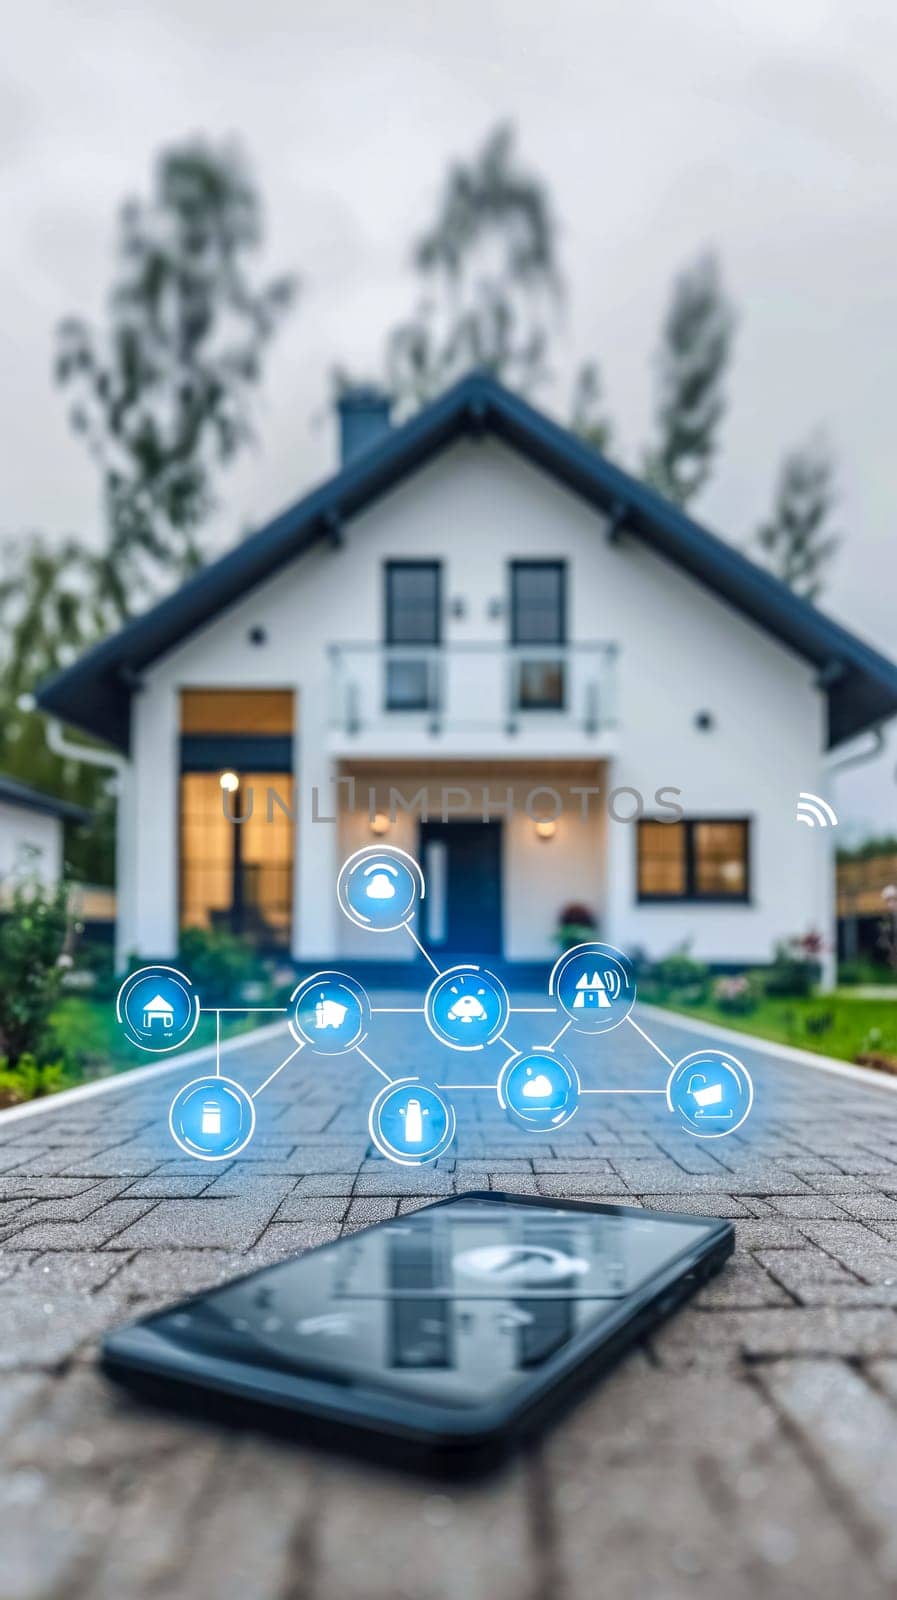 concept of a smart home with a smartphone in the foreground on a pathway, showcasing icons representing various home automation features, with a modern house blurred in the background. vertical